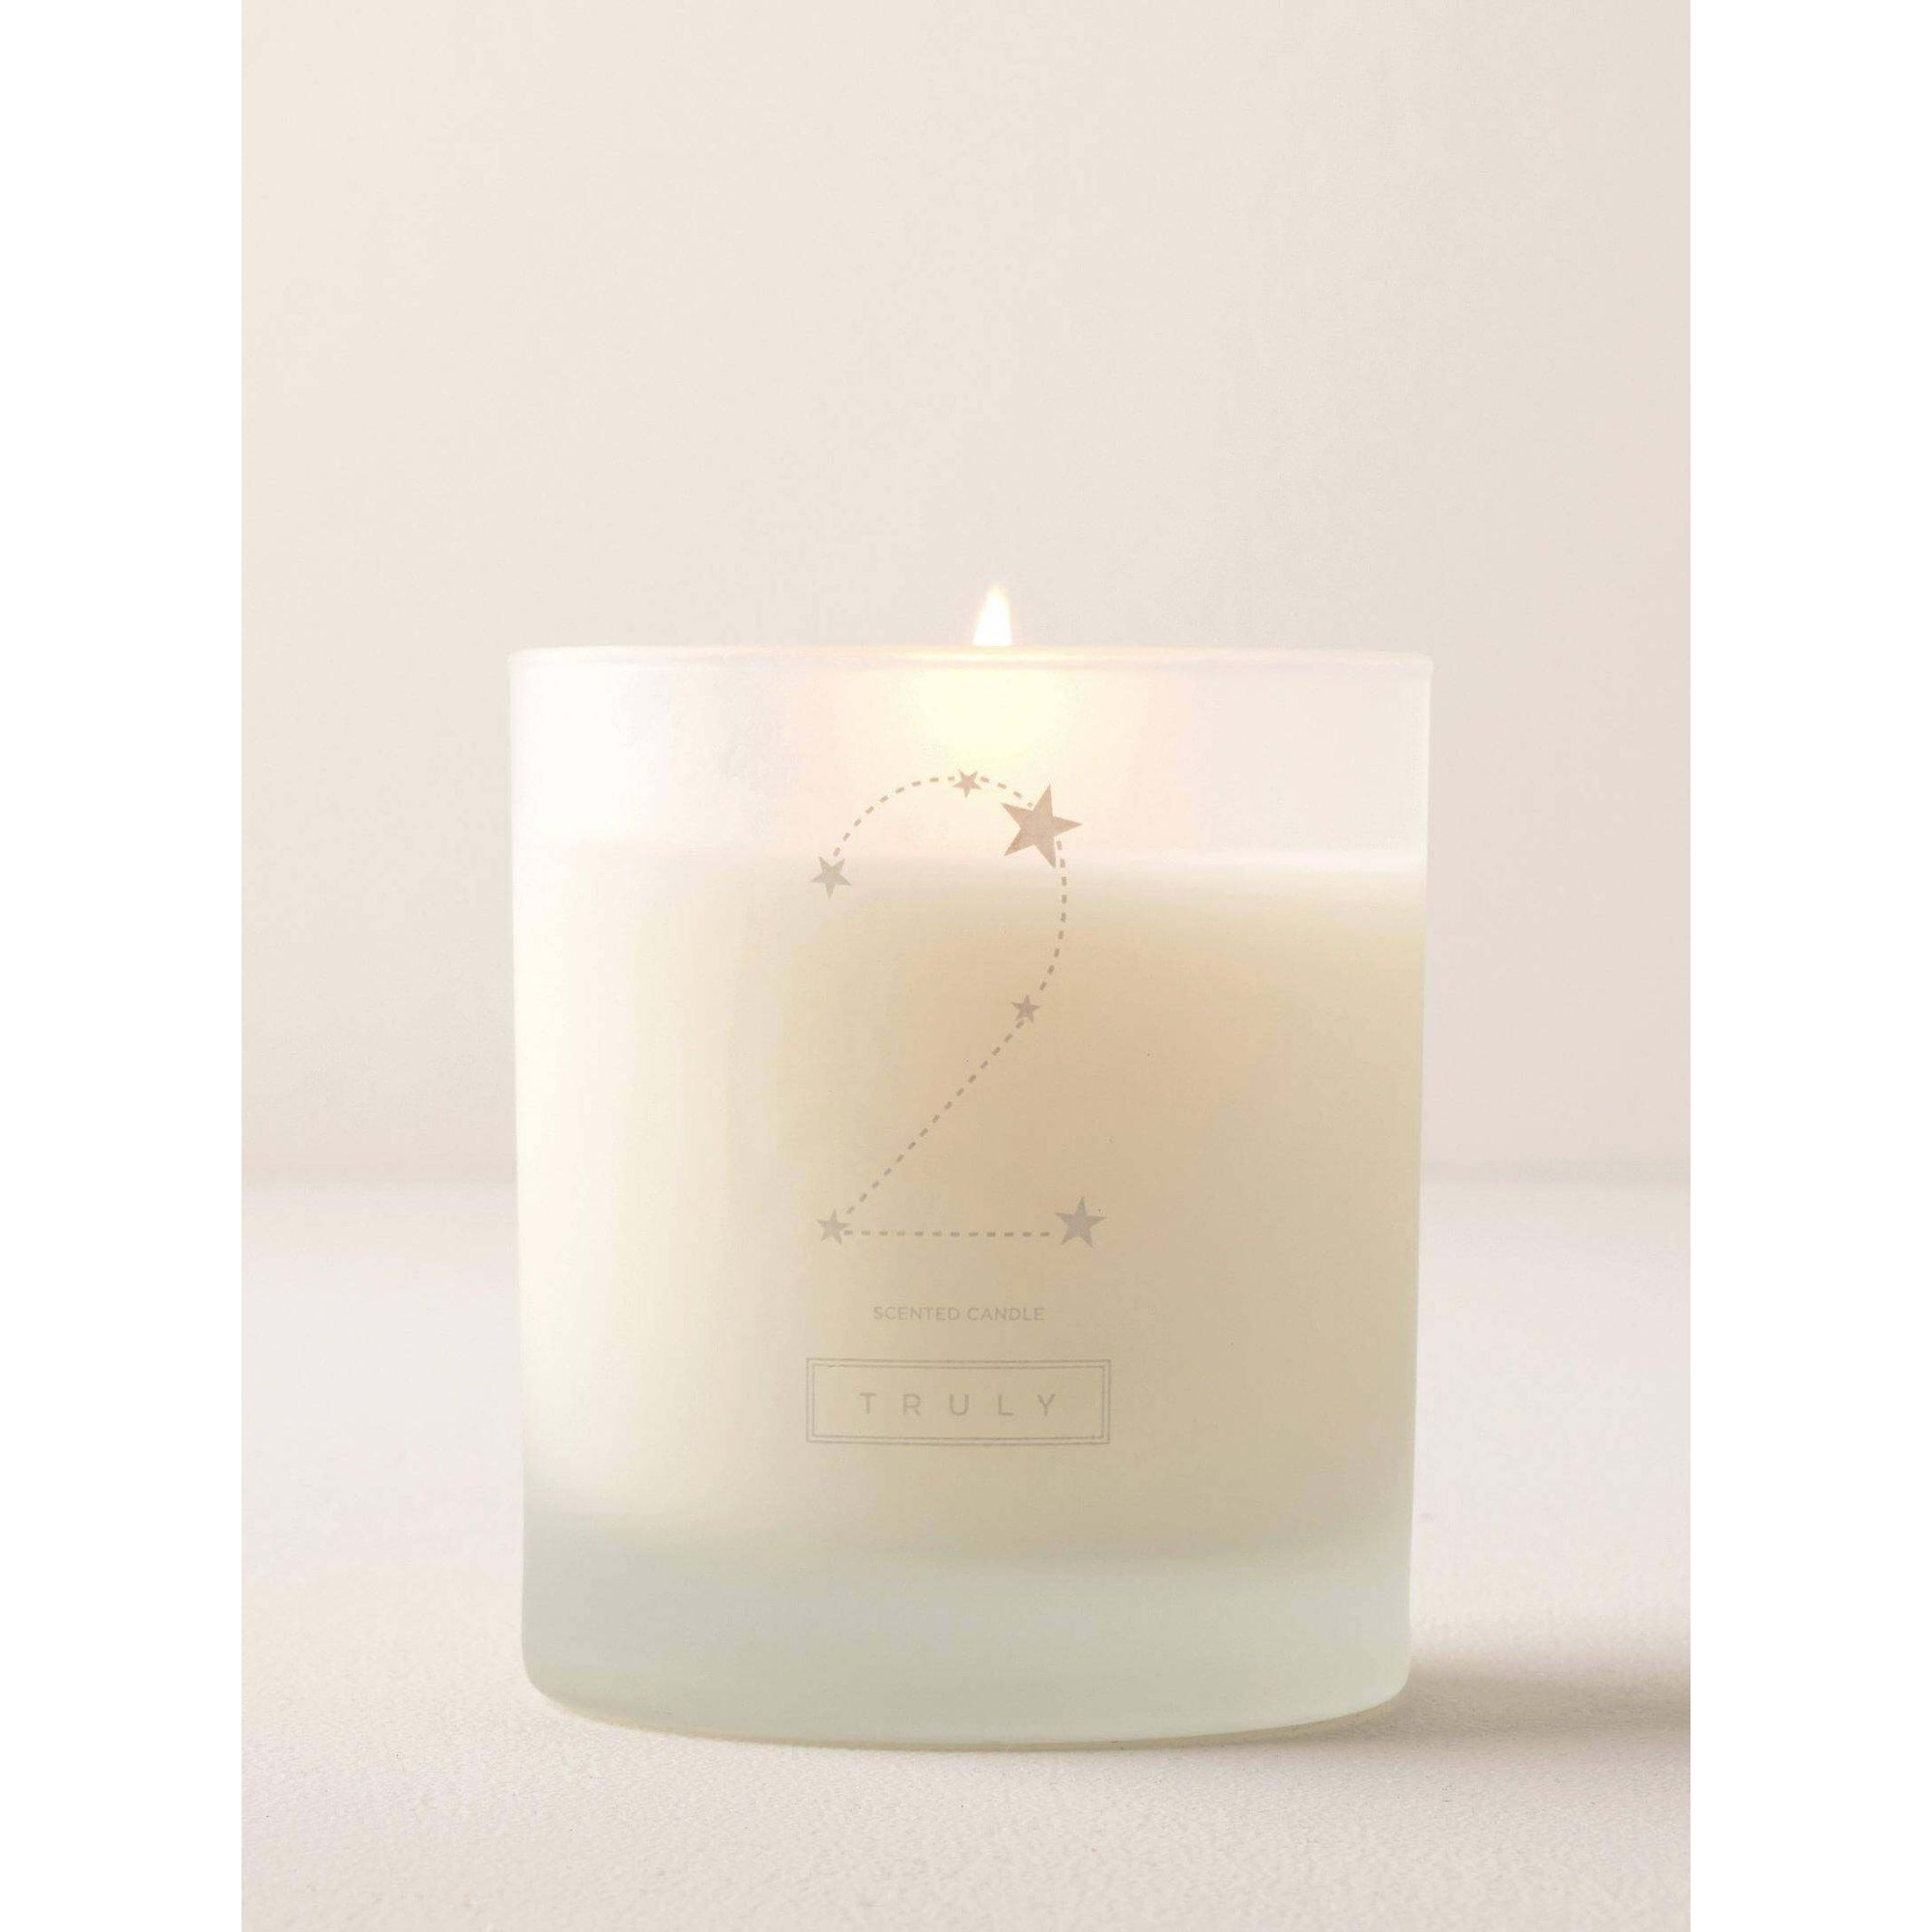 Truly No. 2 Scented Candle, 220g - image 1